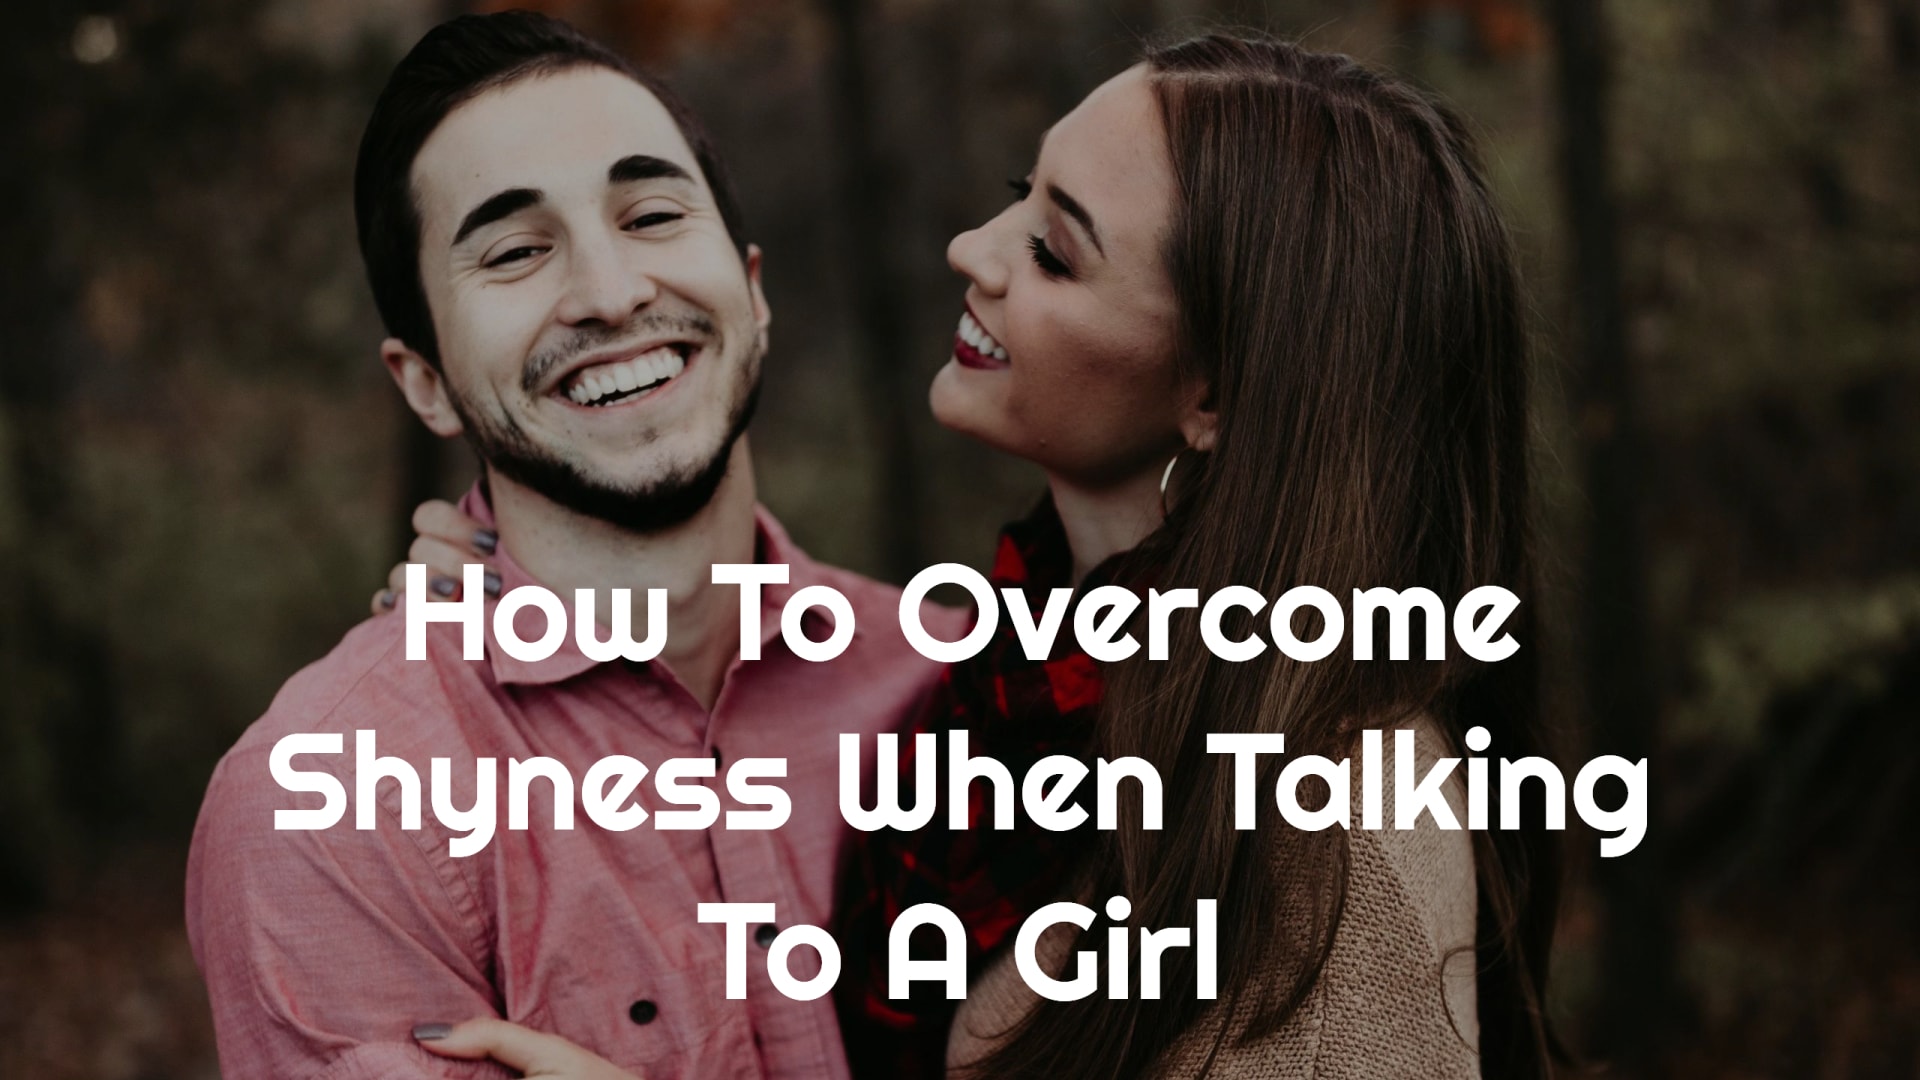 How To Overcome Shyness When Talking To A Girl